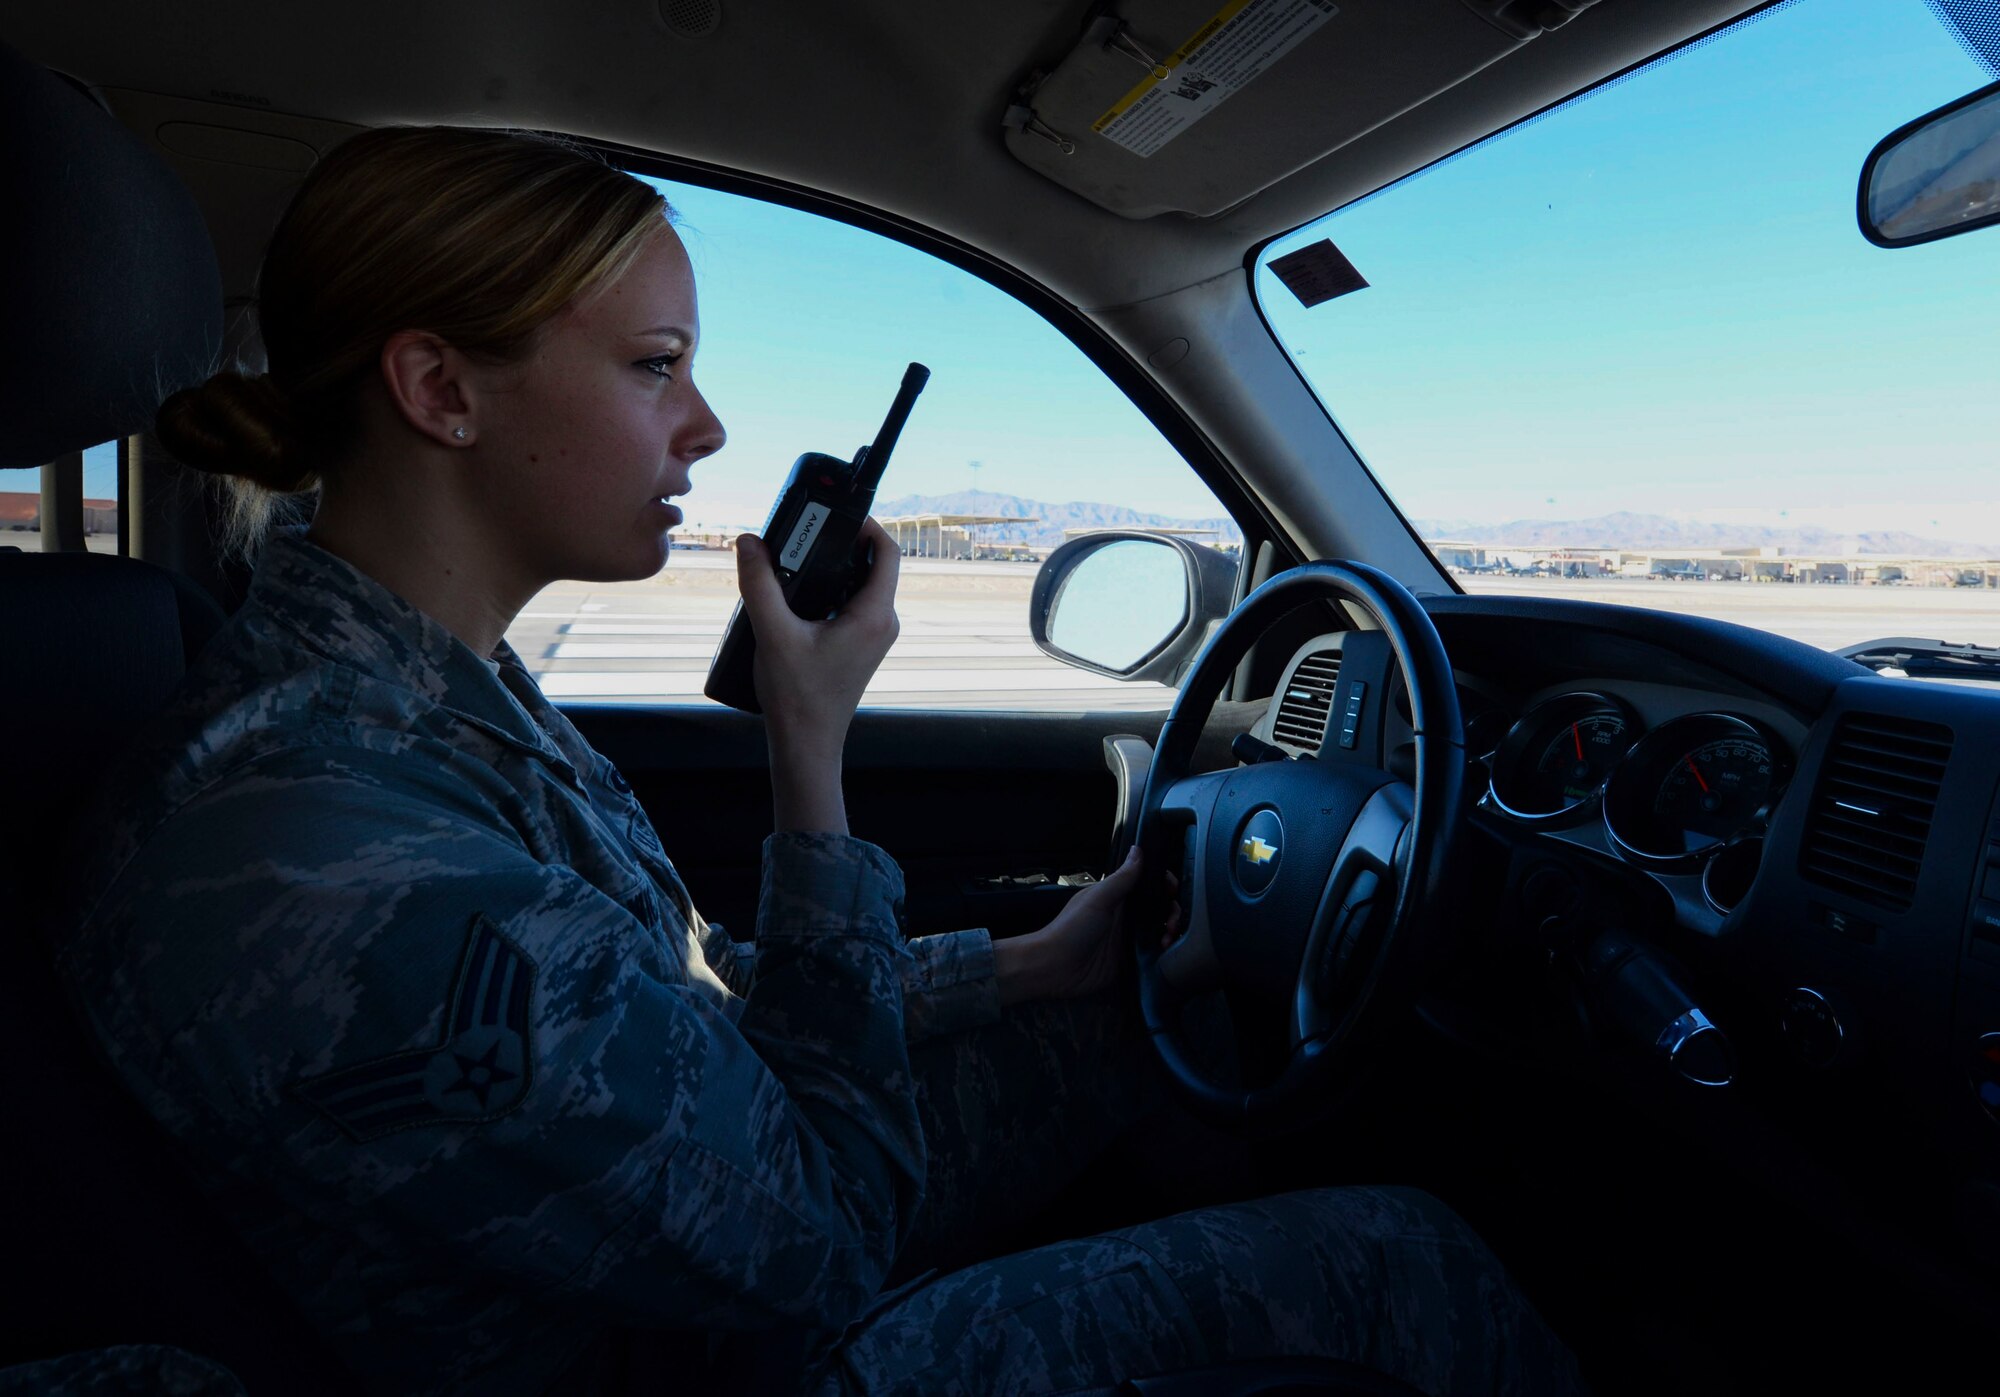 Senior Airman Sierra Rodwick, 57th Operations Support Squadron airfield management shift lead, using a radio to contact the Air Traffic Control Tower Oct. 15, 2018 on Nellis Air Force Base, Nevada. The main responsibility of airfield management shift leads is ensuring the flightline’s safety. (U.S. Air Force photo by Airman Bailee A. Darbasie)